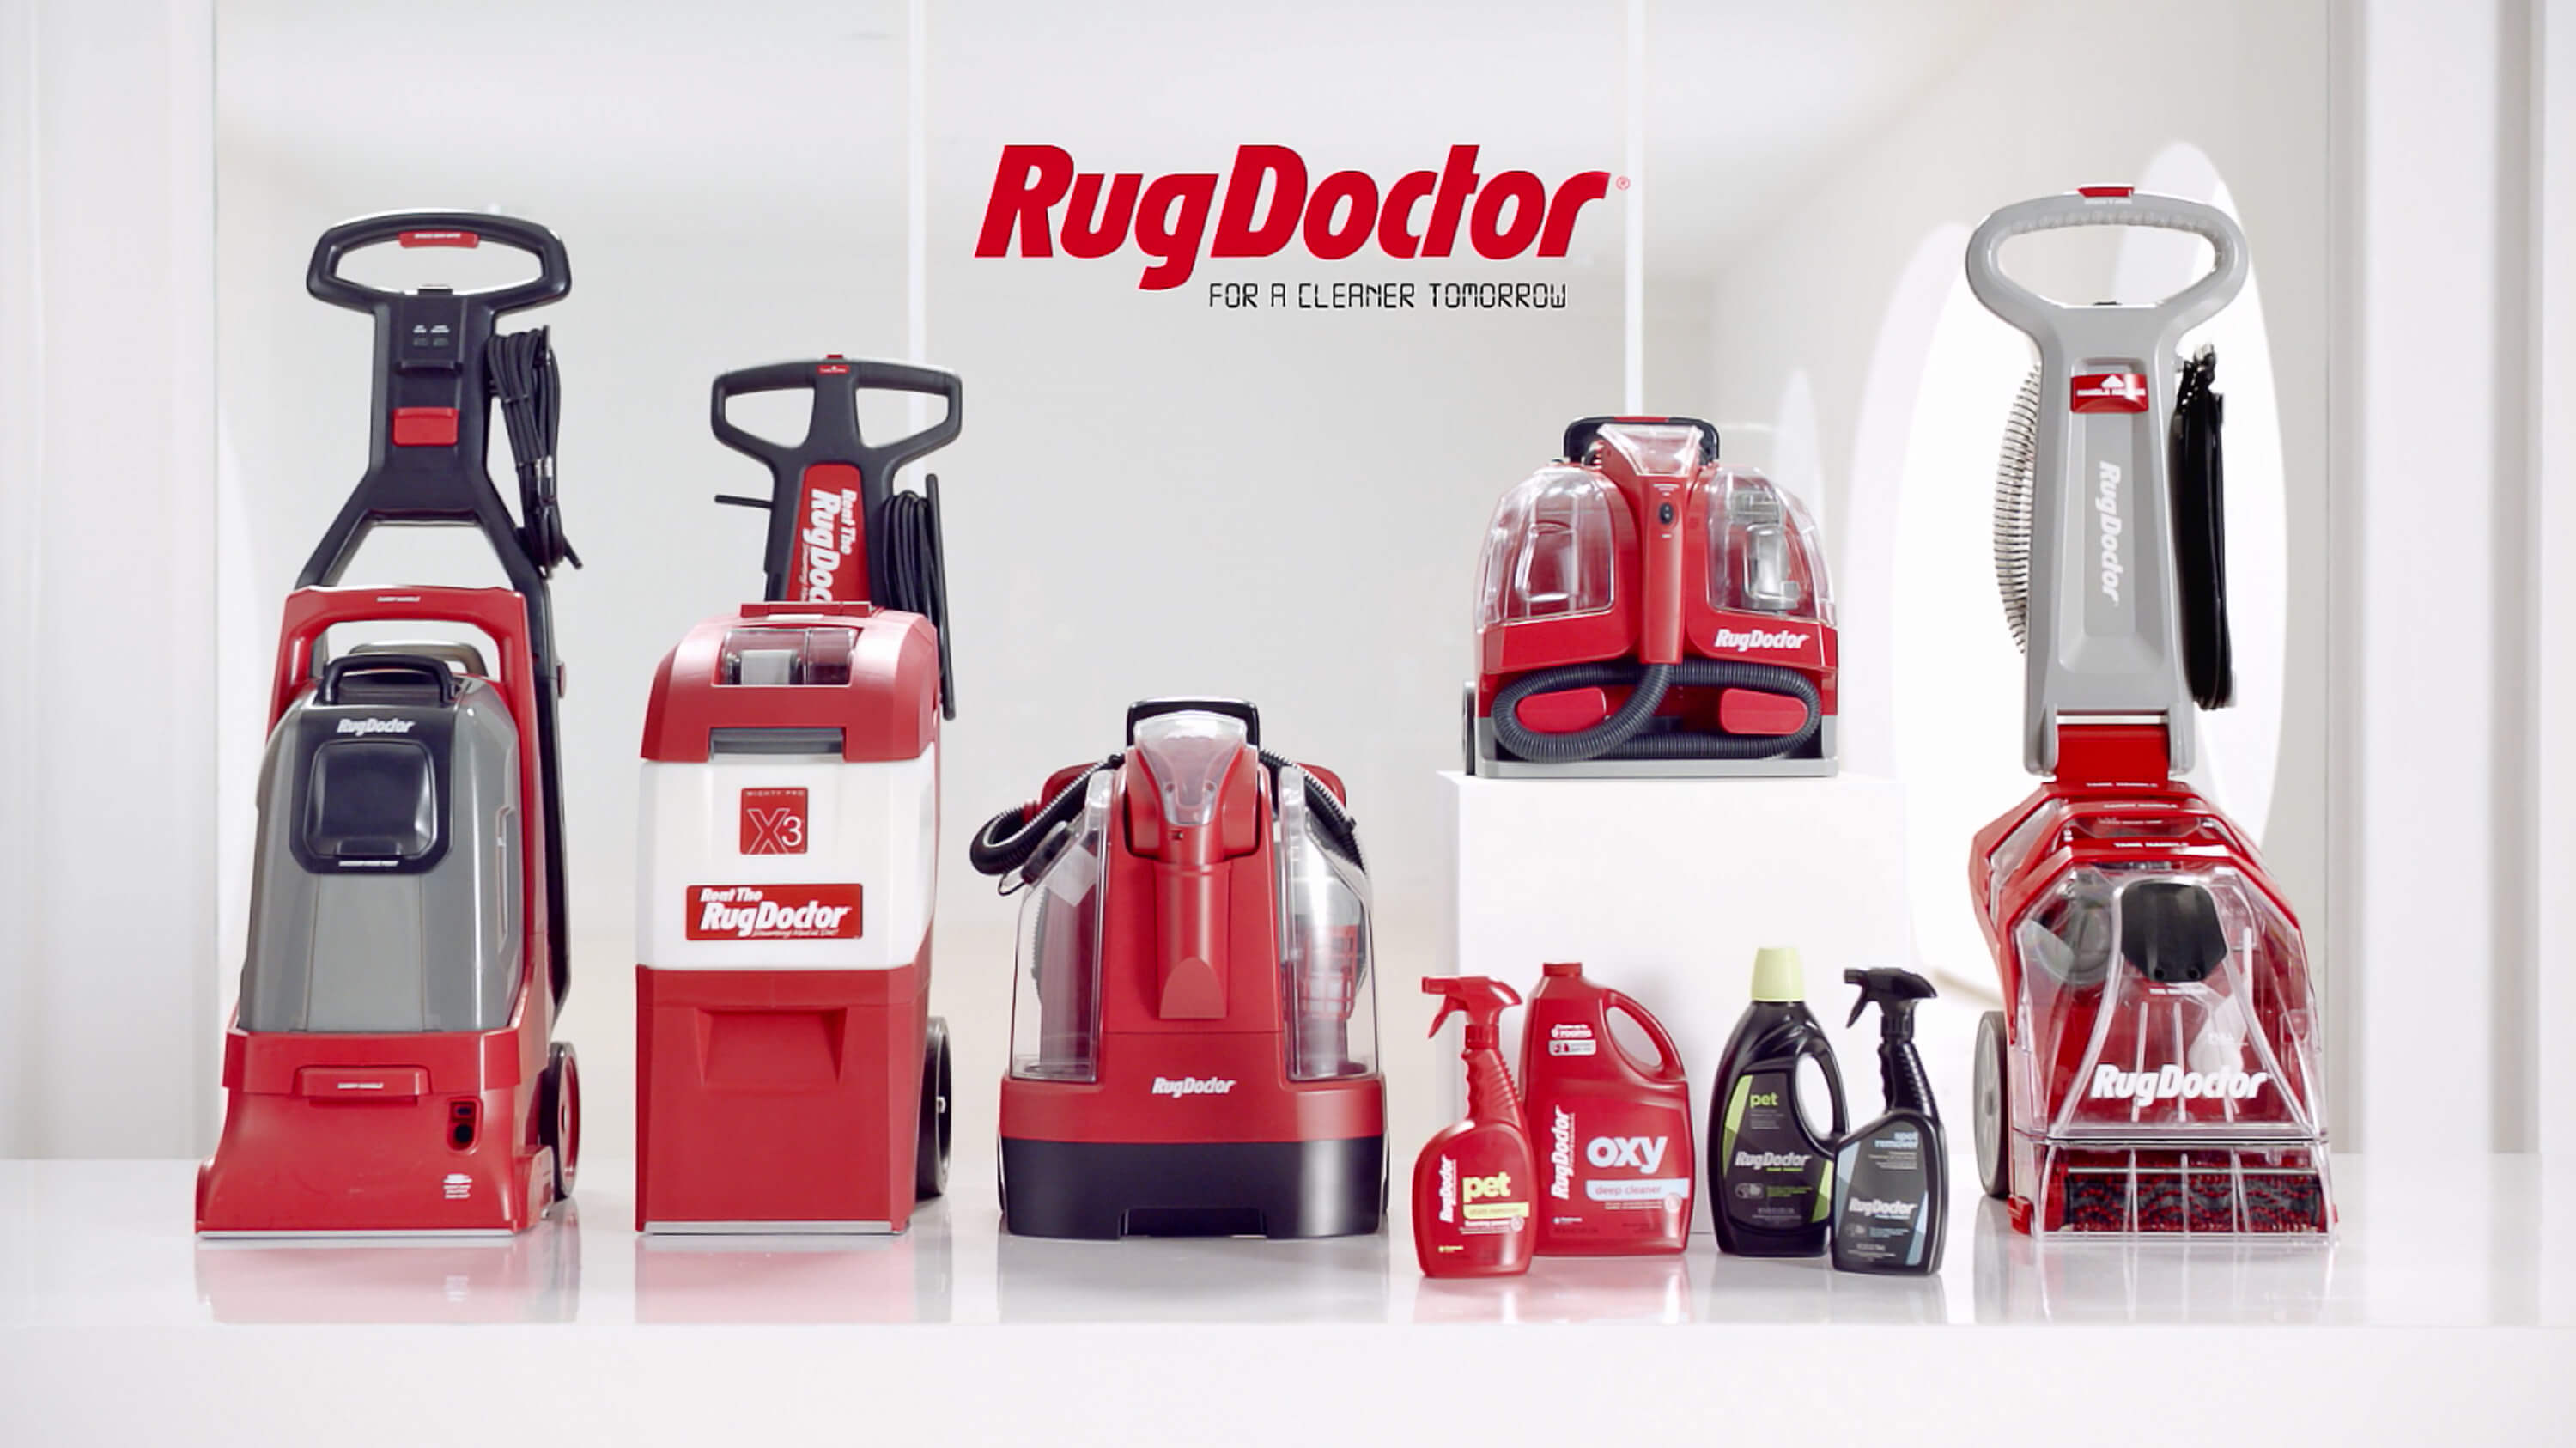 Rug Doctor Full LIne of Products